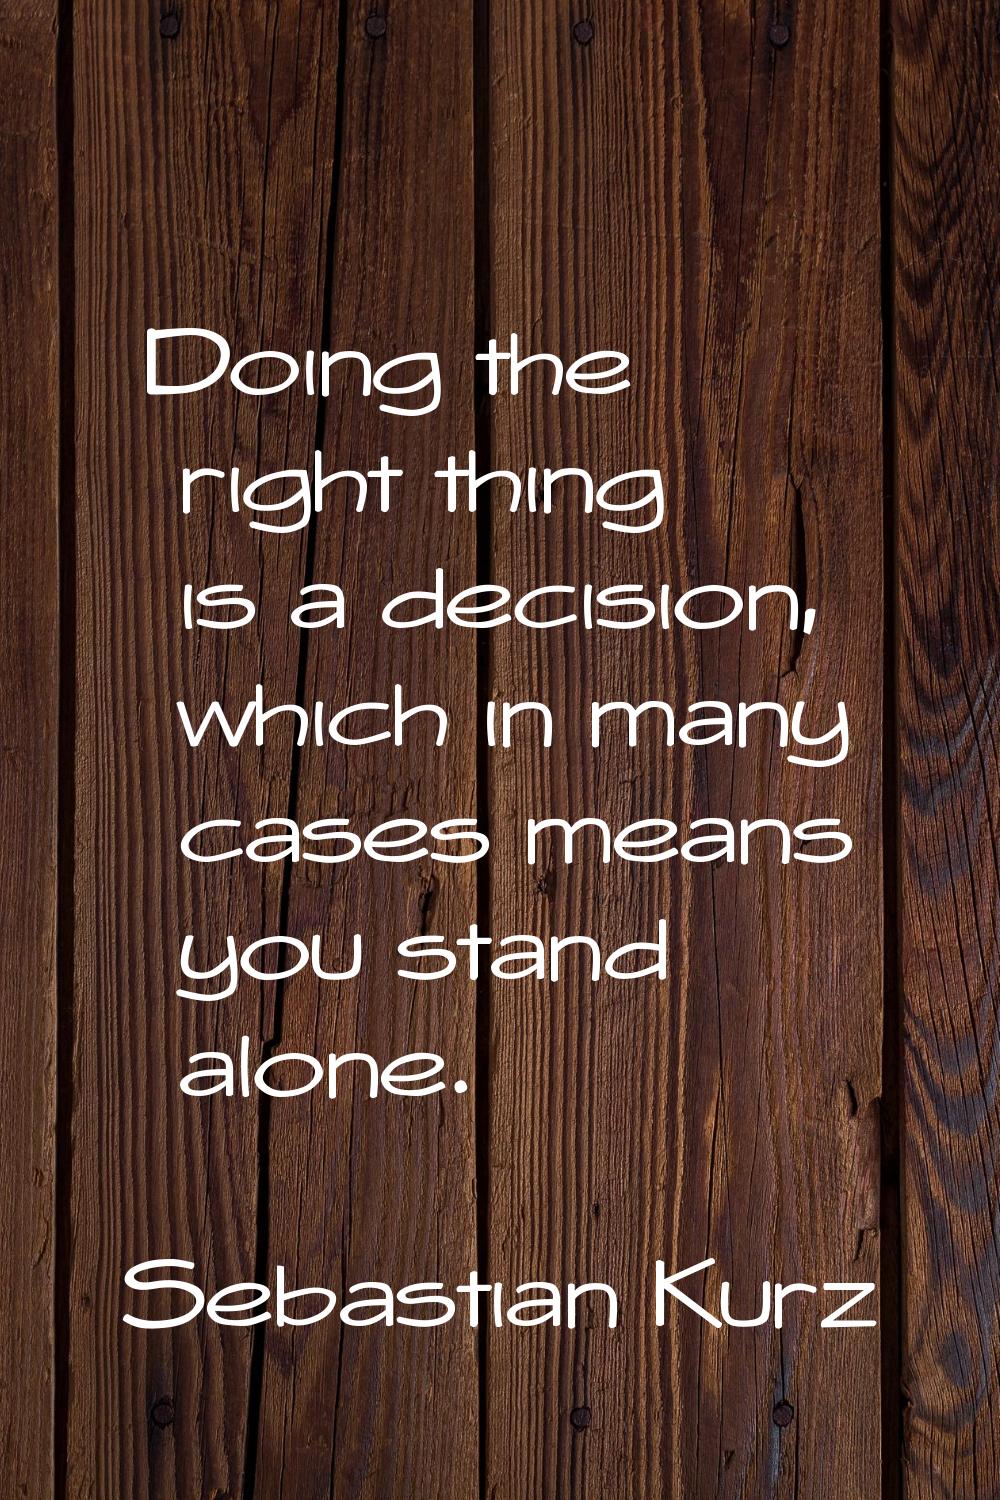 Doing the right thing is a decision, which in many cases means you stand alone.